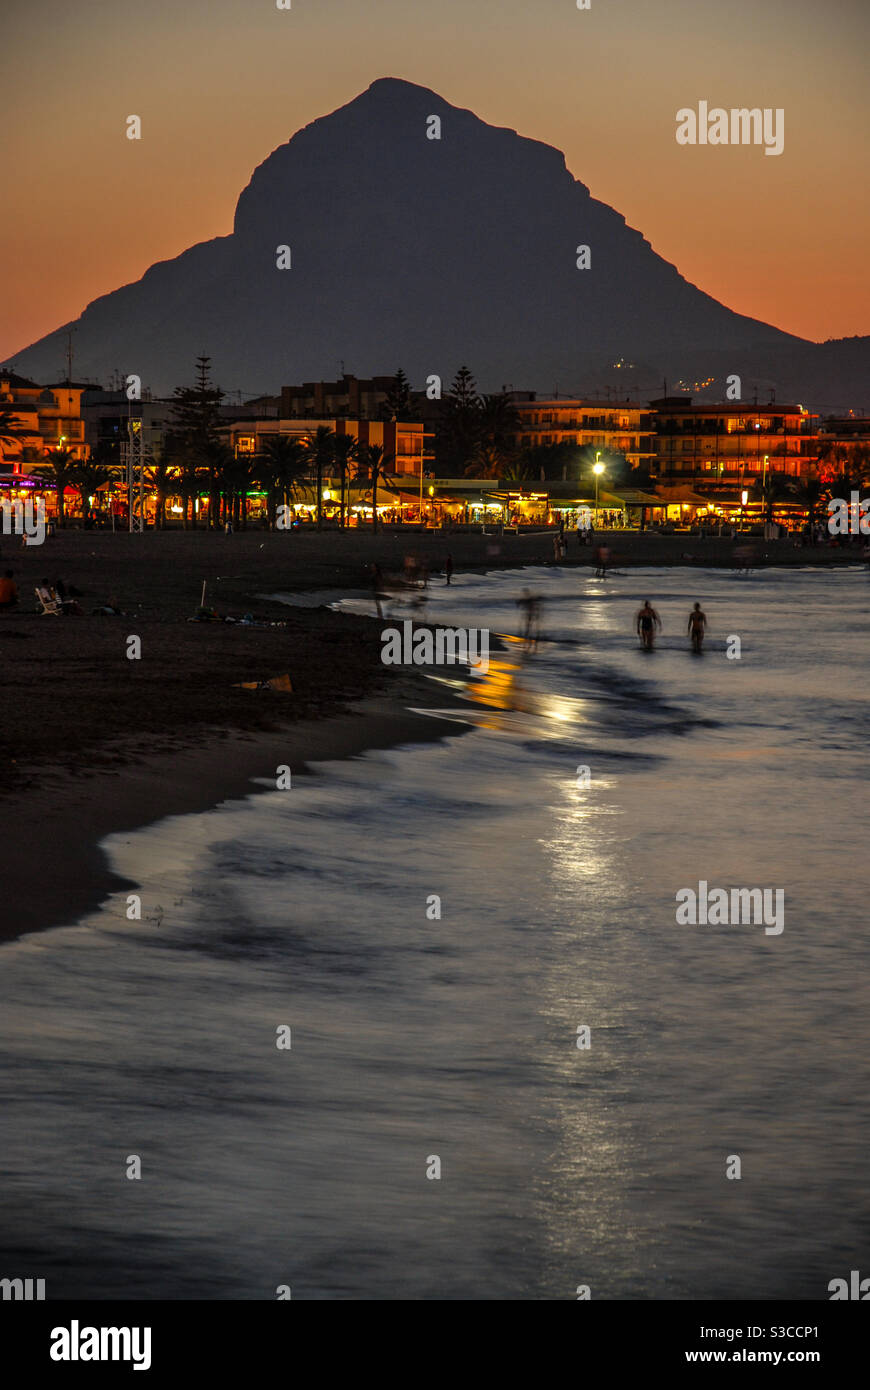 Arenal beach scene with people in the sea and sunset behind Montgo mountain, Javea, Alicante Province, Spain Stock Photo